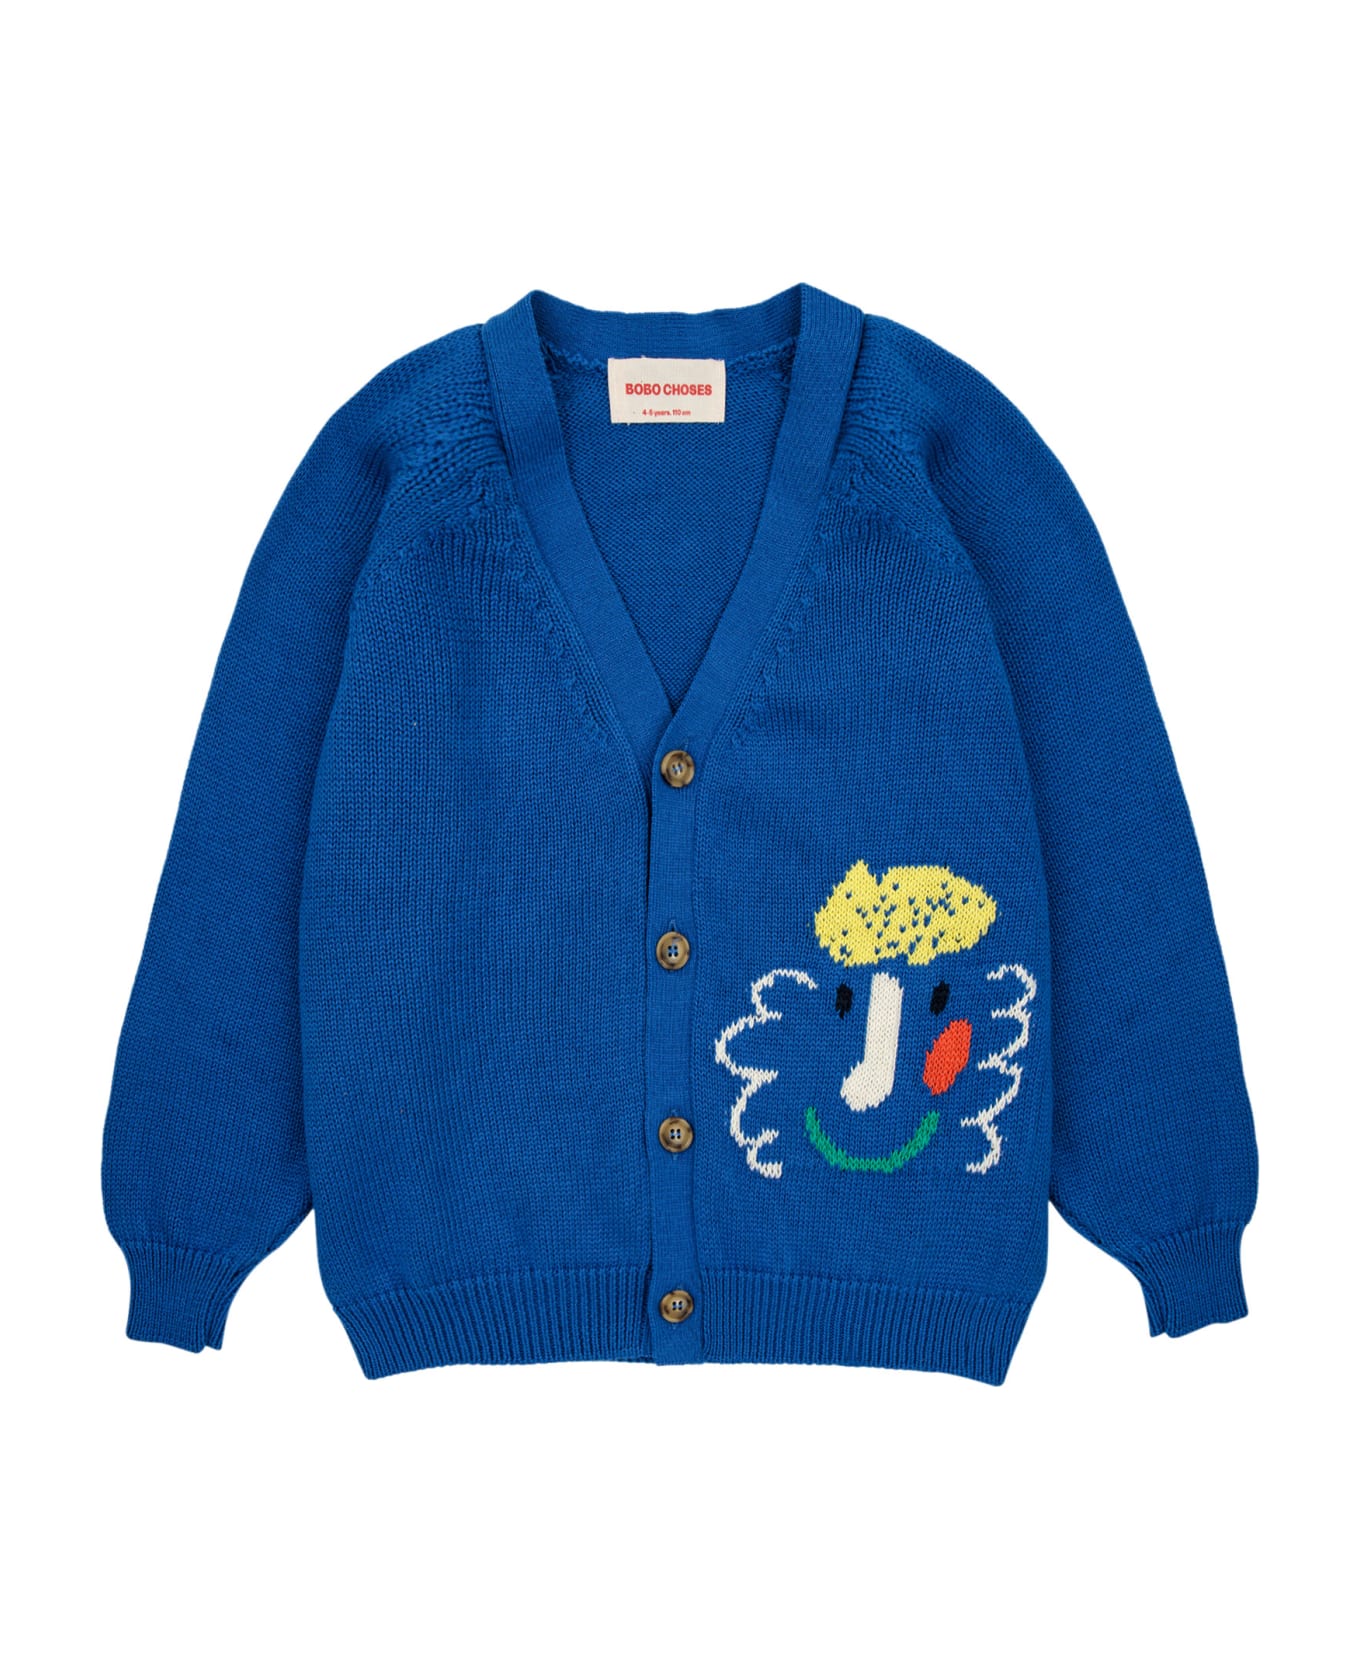 Bobo Choses Blue Cardigan For Kids With Embroidered Pattern - Blue